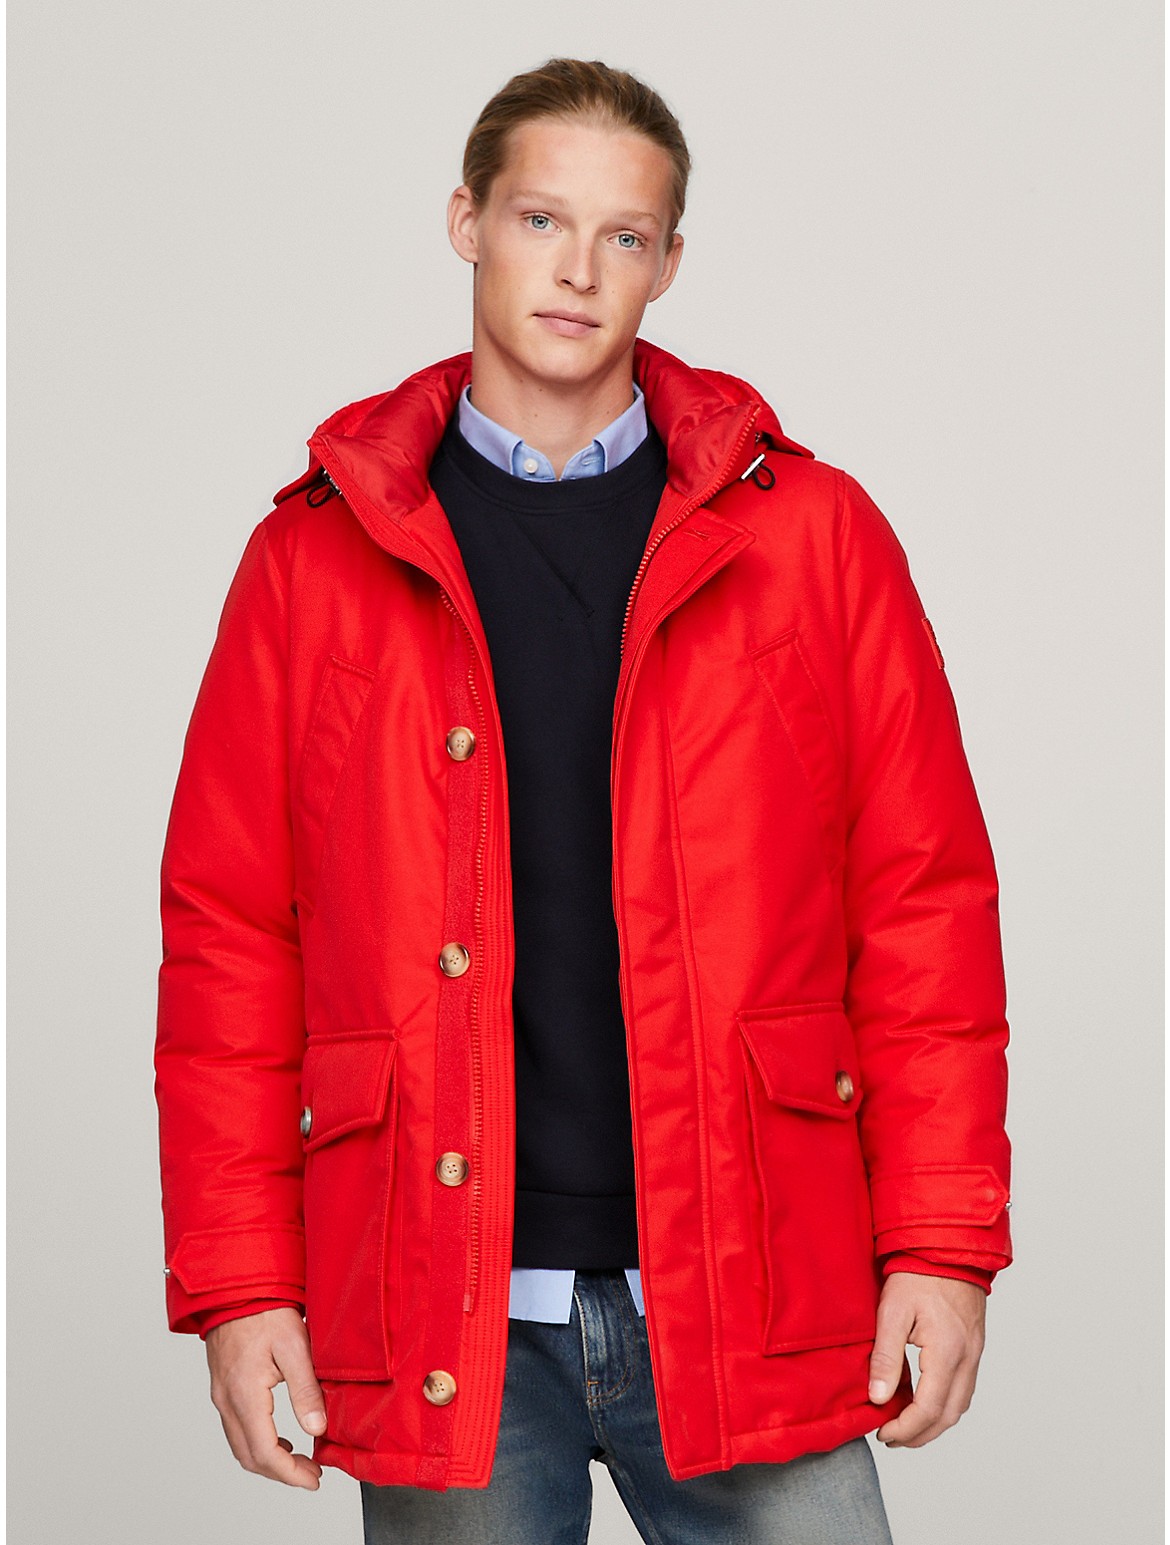 Tommy Hilfiger Men's Hooded Recycled Down Parka